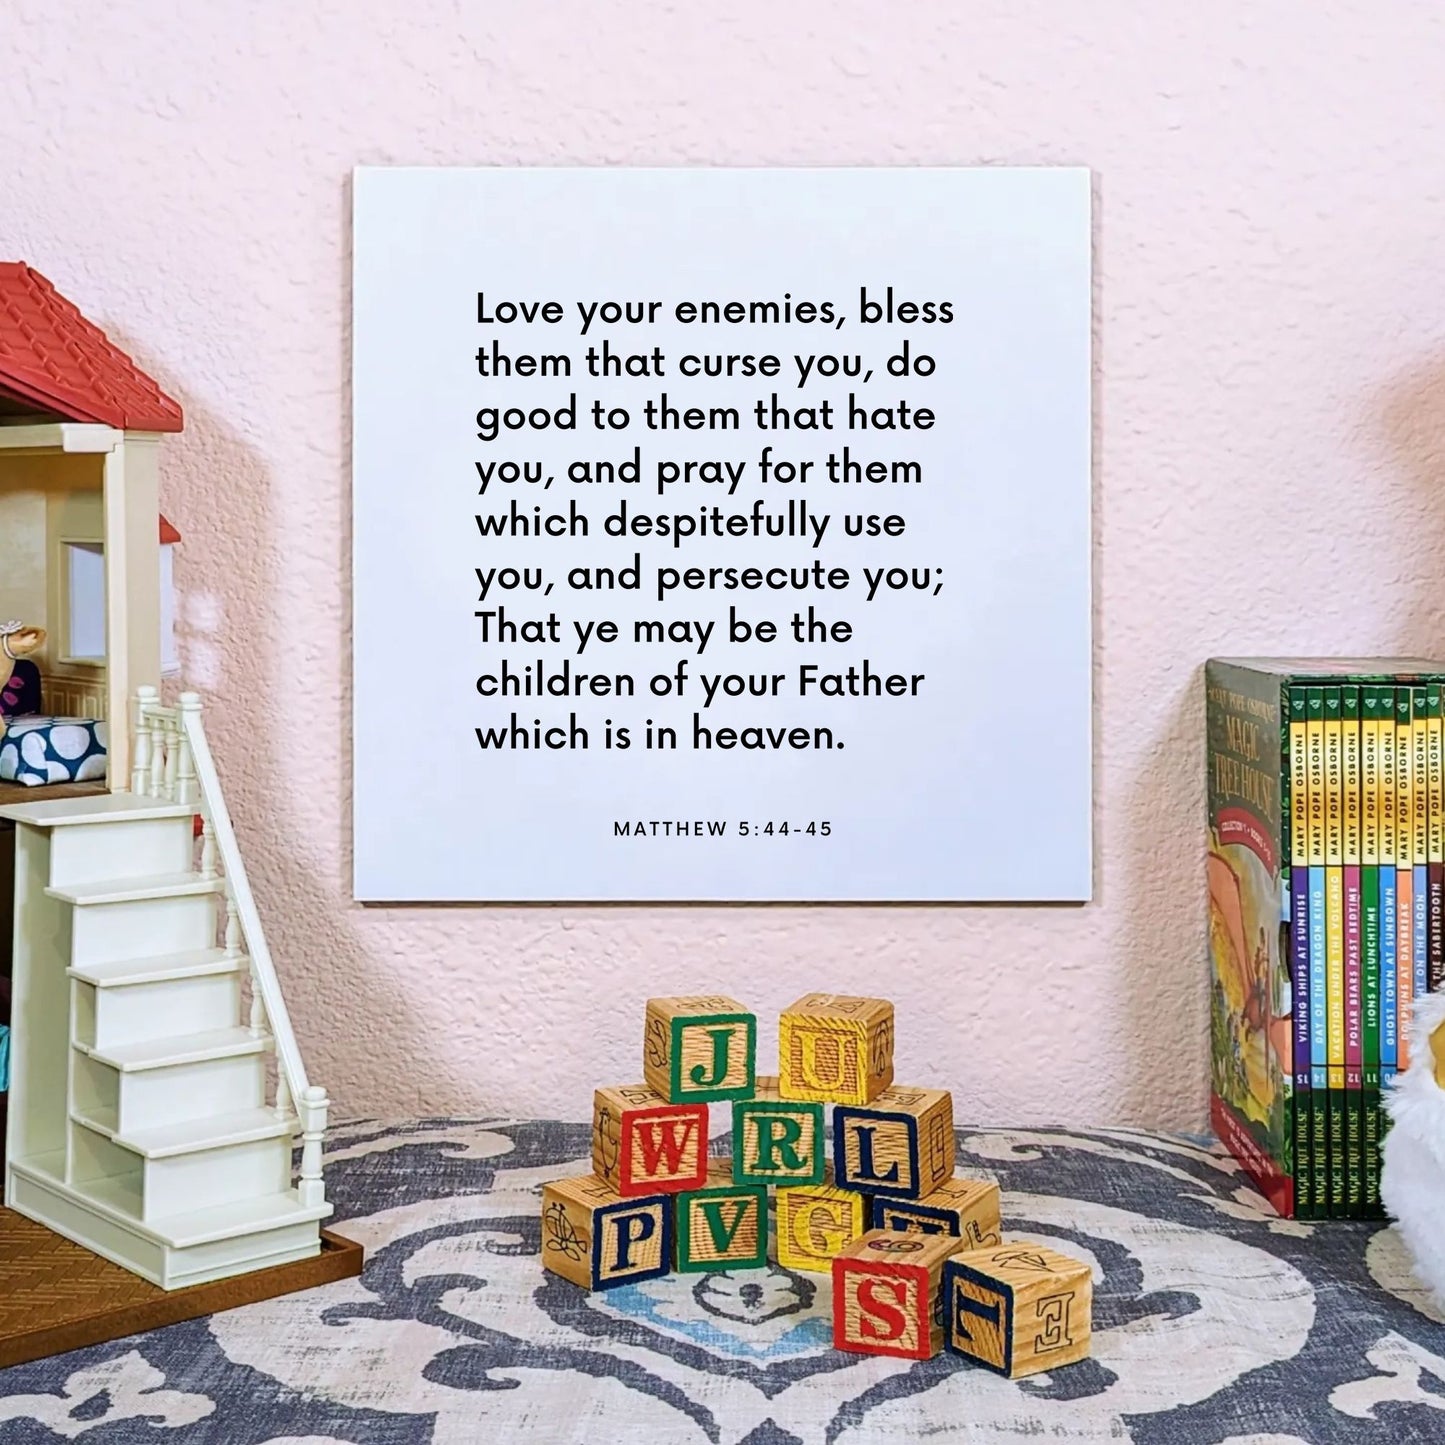 Playroom mouting of the scripture tile for Matthew 5:44-45 - "Love your enemies, bless them that curse you"